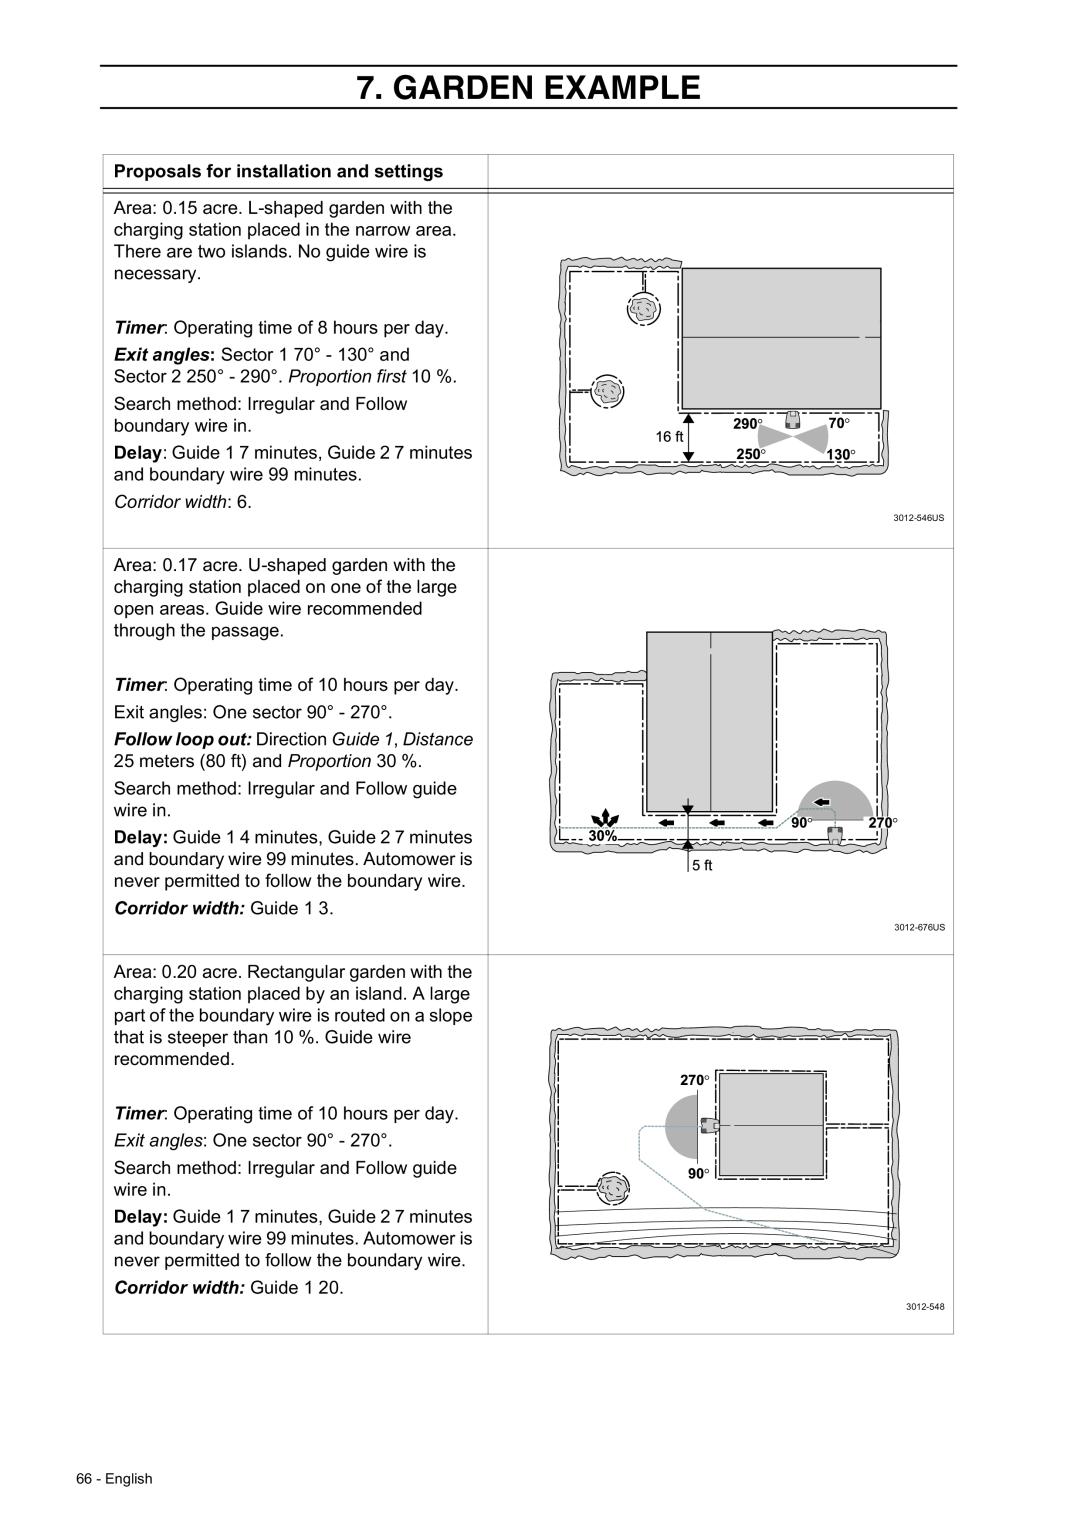 Husqvarna 230 ACX/220 AC manual Corridor width Guide 1, Garden Example, Proposals for installation and settings, English 